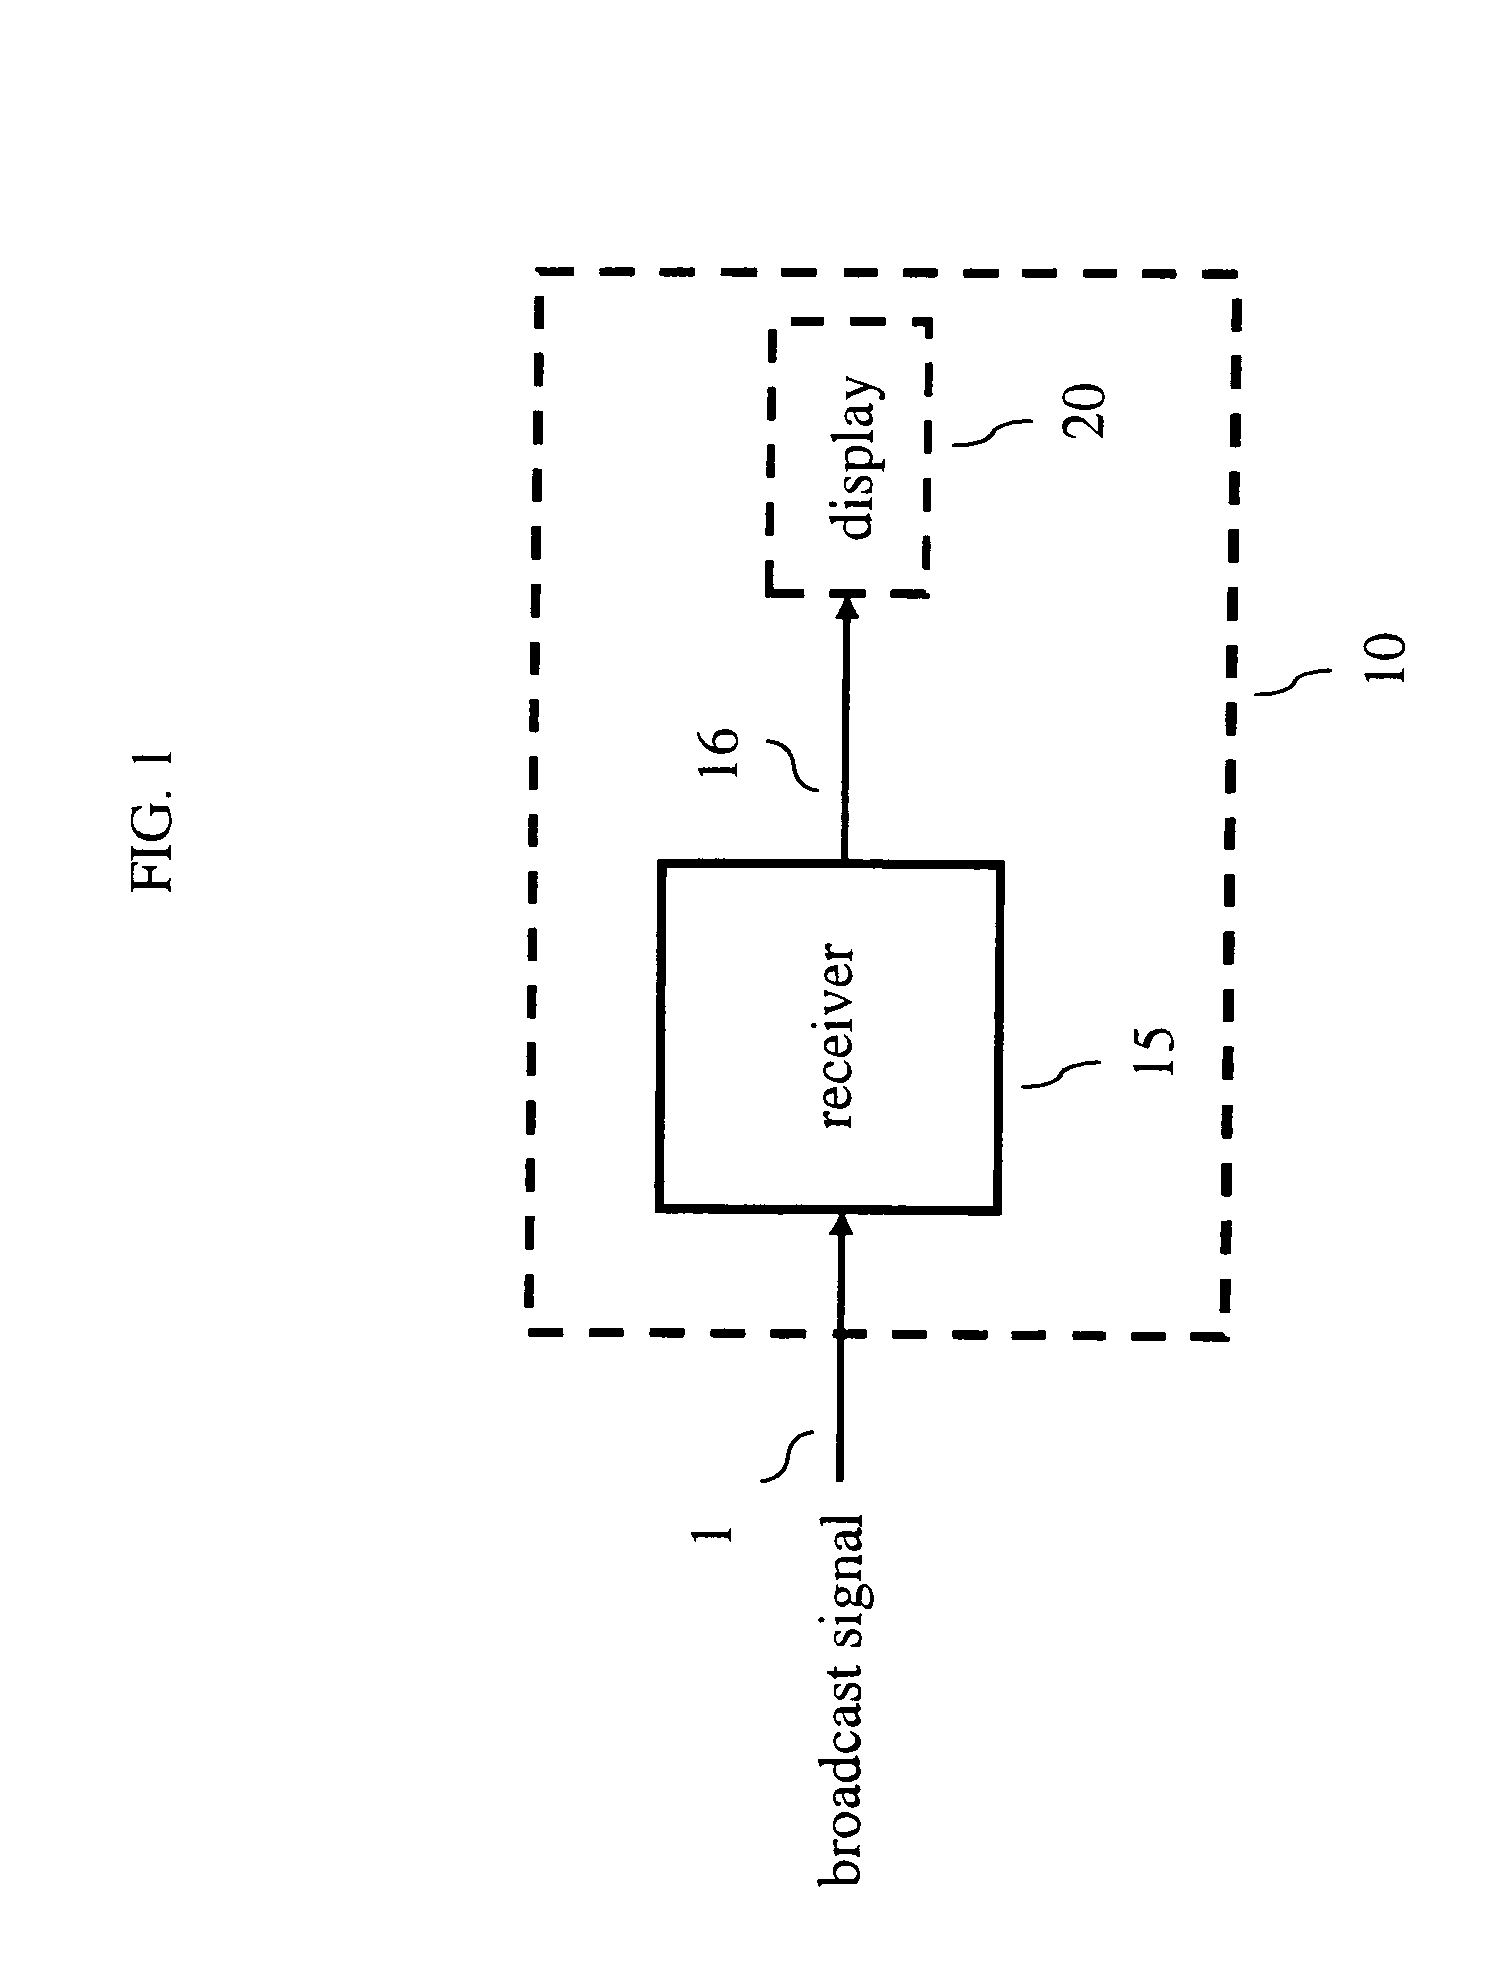 Apparatus and method for classifying modulations in multipath environments